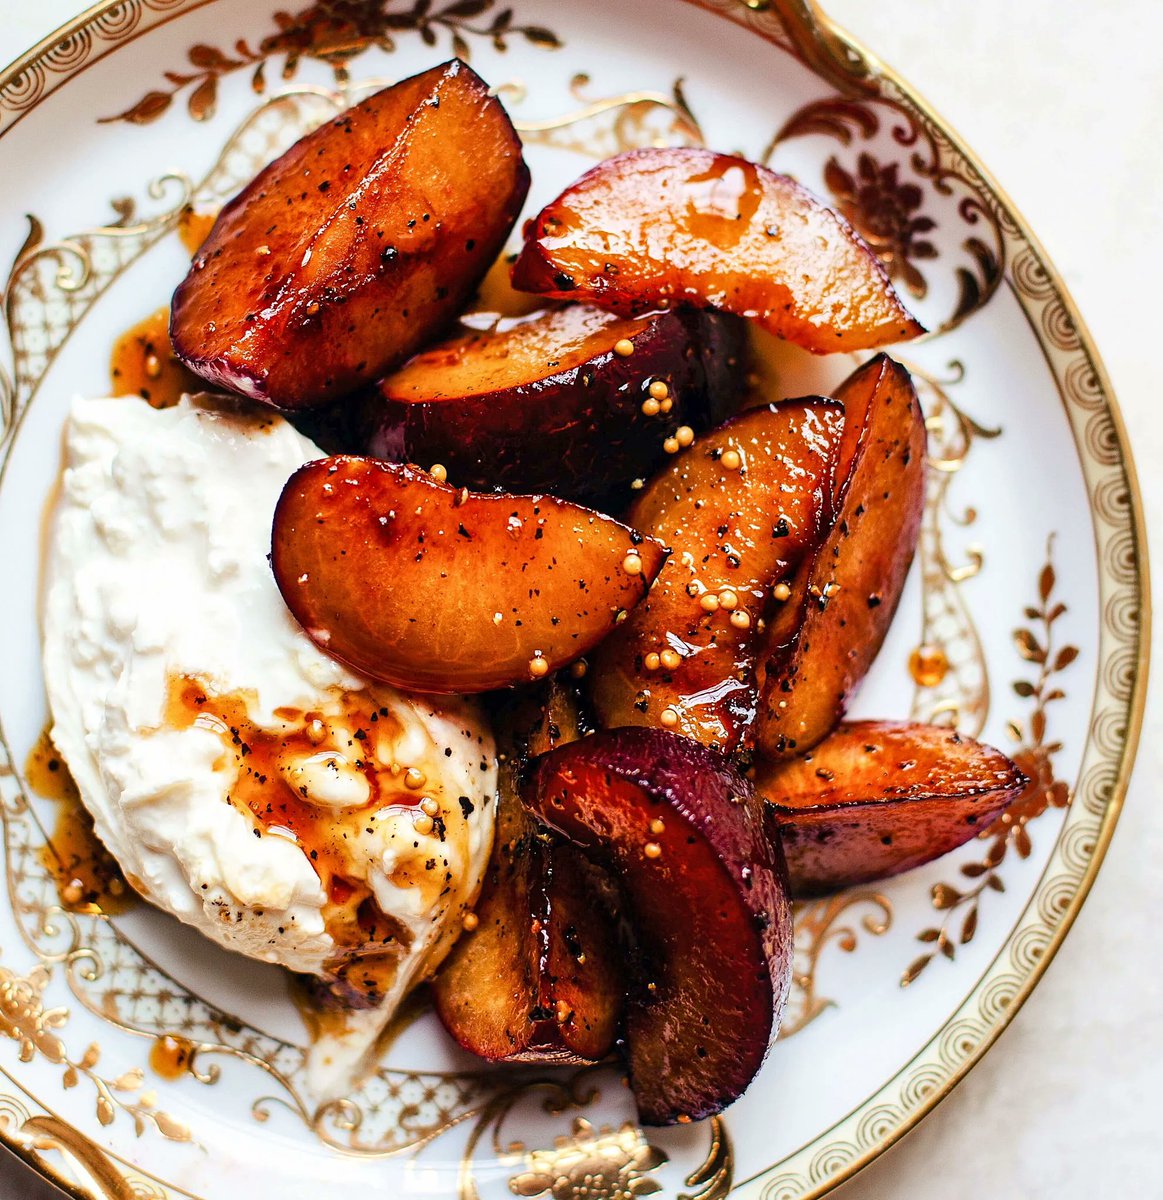 Elevating appetizers with a summer twist: Baked plums drizzled with balsamic, sprinkled with mustard seeds, and paired with creamy burrata. A flavor symphony that's both elegant and utterly delicious! 🍑🧀🌱 #SummerRecipe